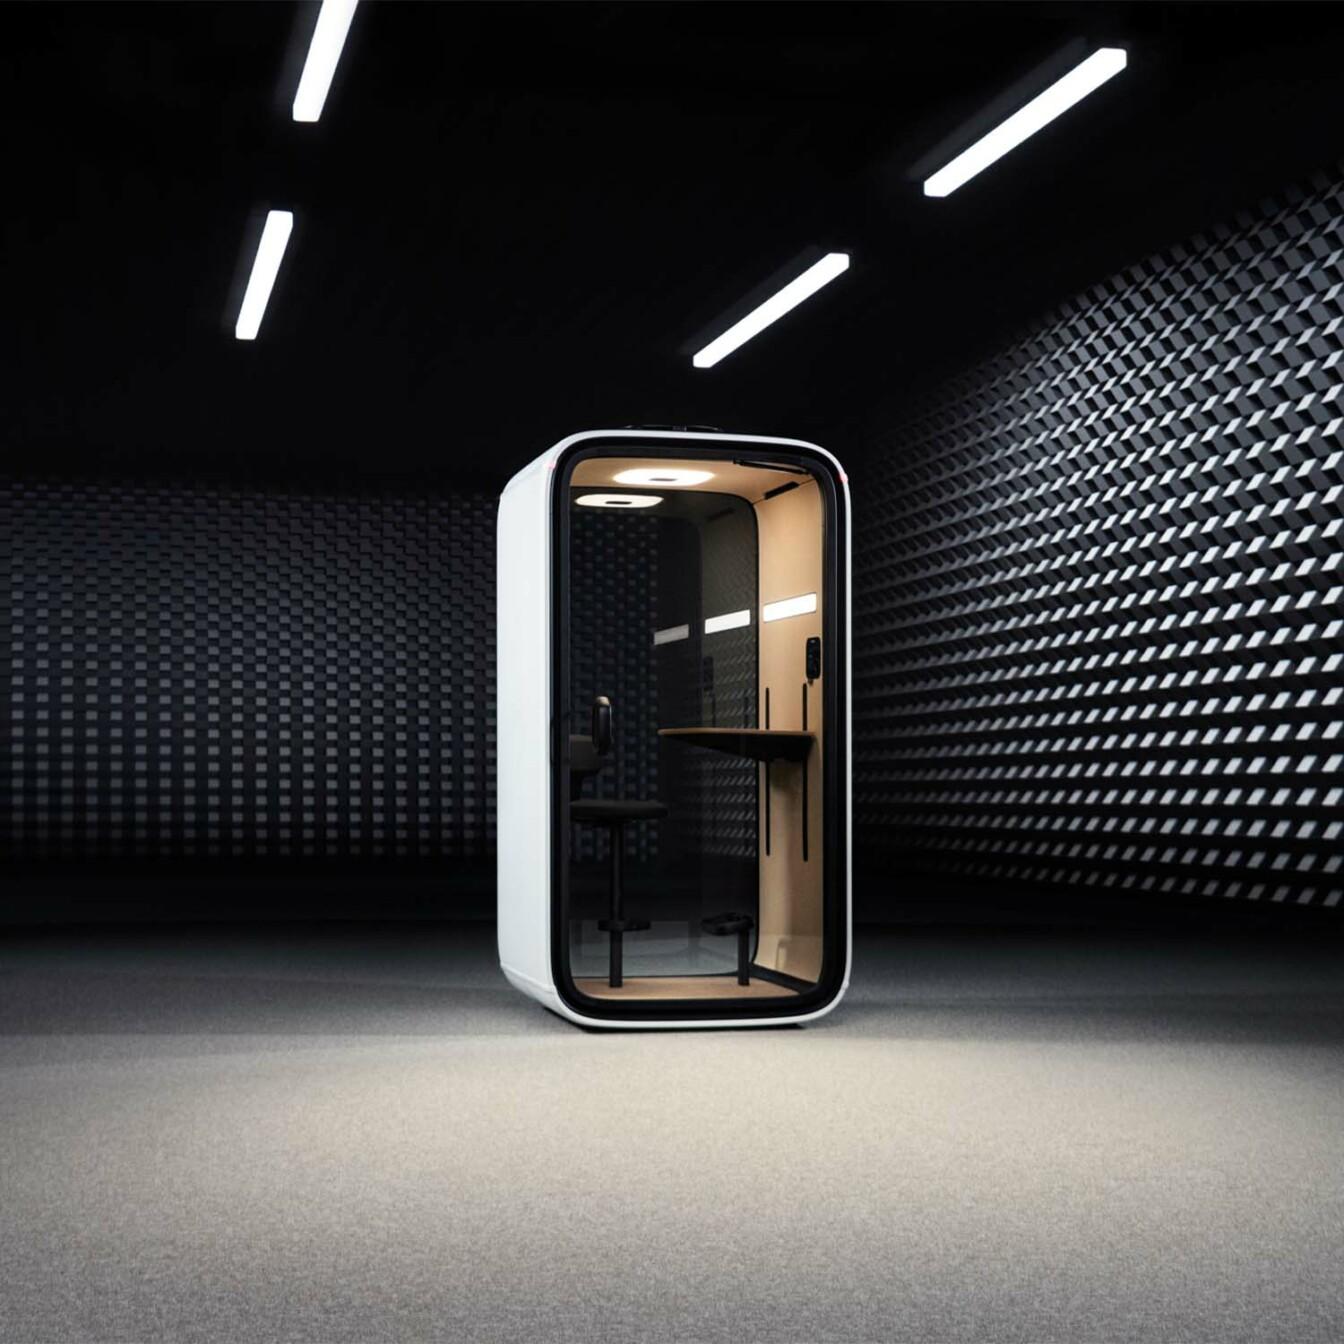 Framery One office pod in an acoustic environment.